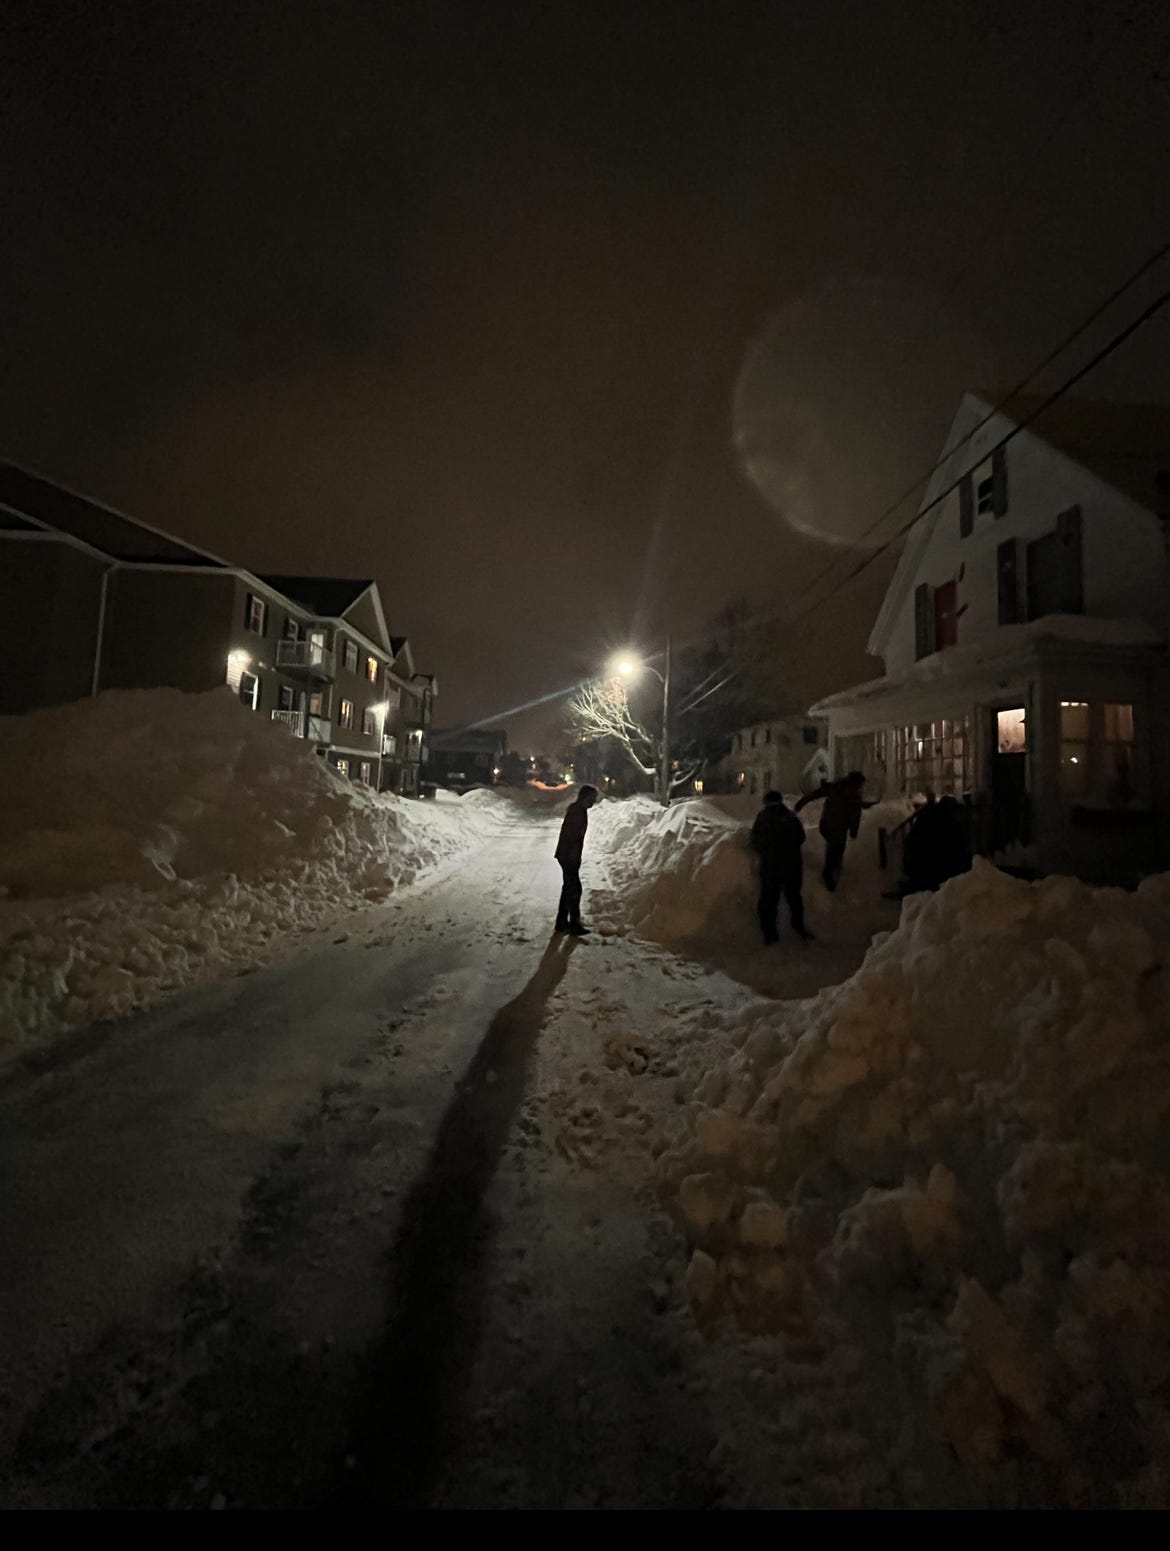 A snowy winter scene on my street. the sky is dark. we're coming home from Dairy Queen by foot. The kids are walking past giant snow drifts to get to our house.